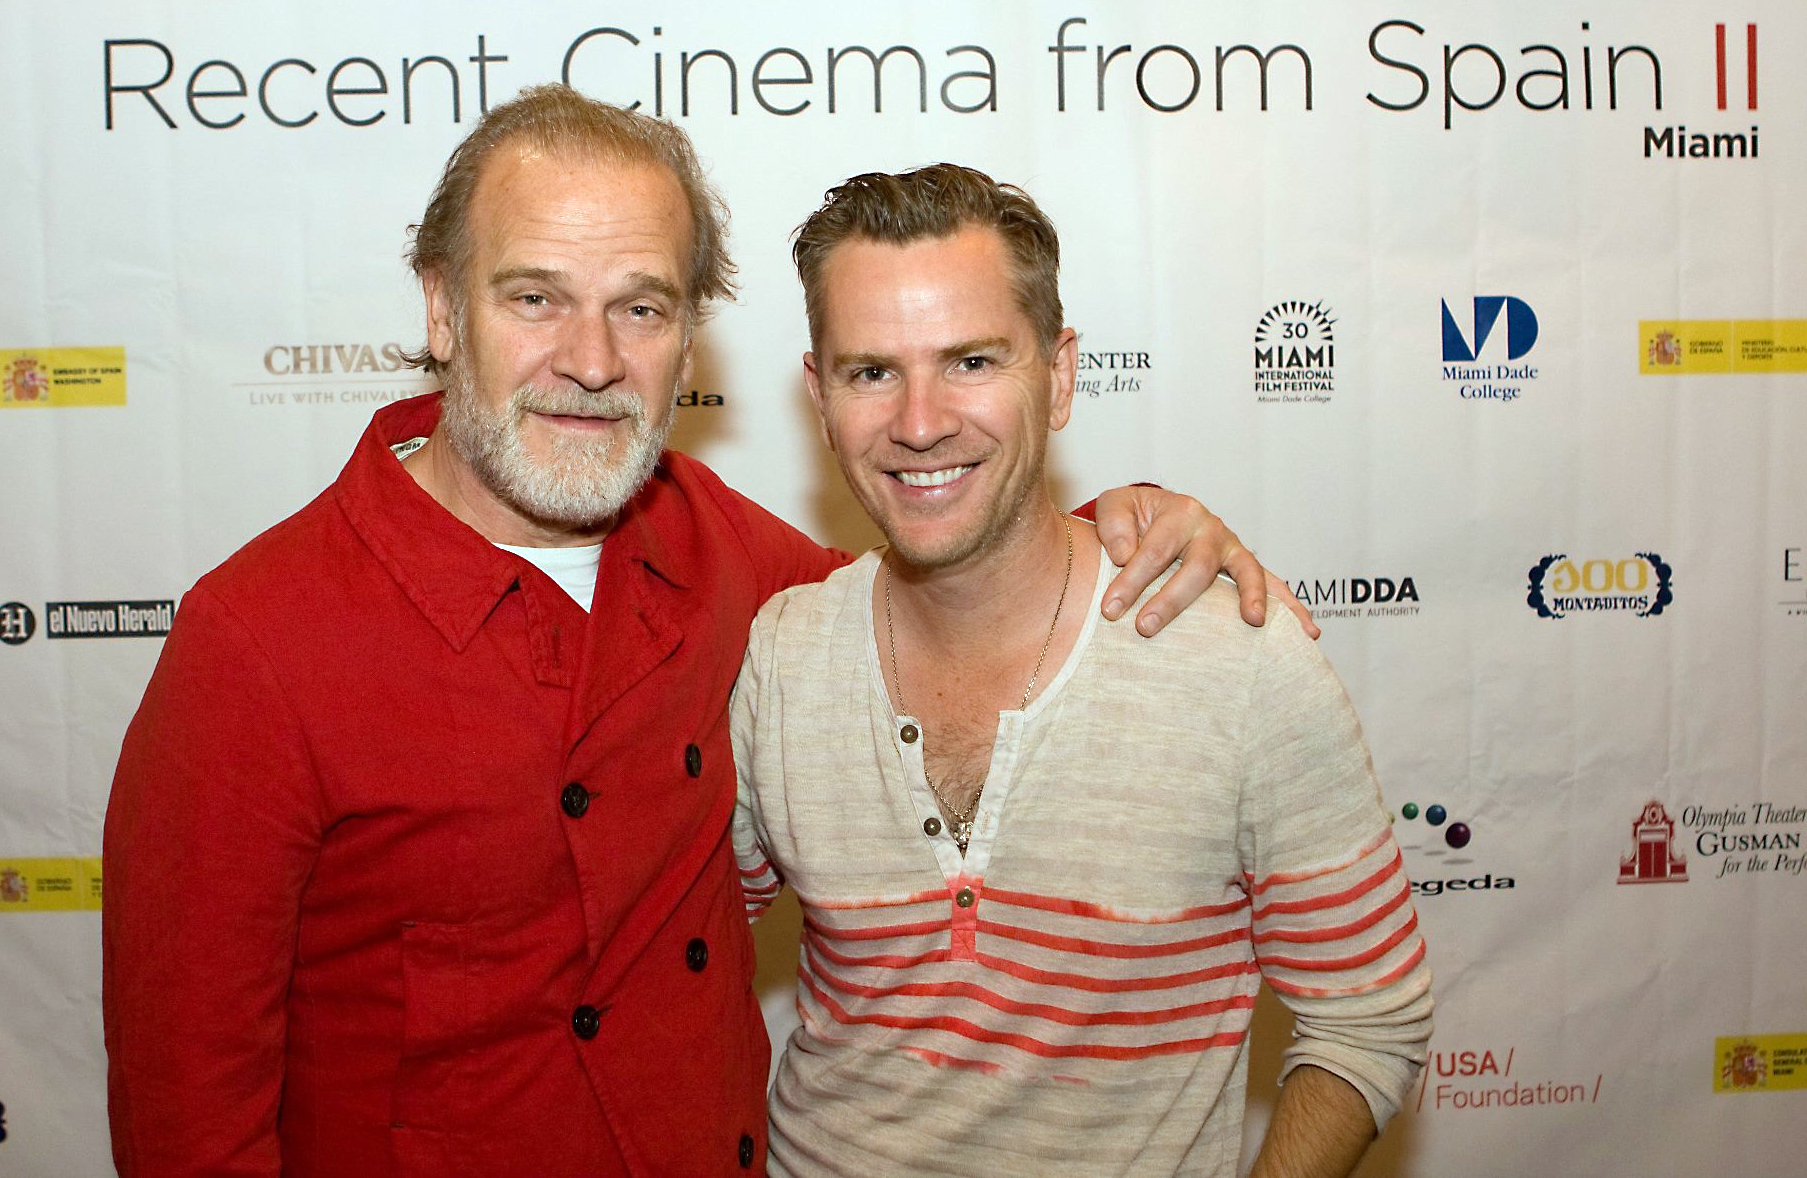 Luis Homer and Thomas Mikusz attending Recent Cinema from Spain